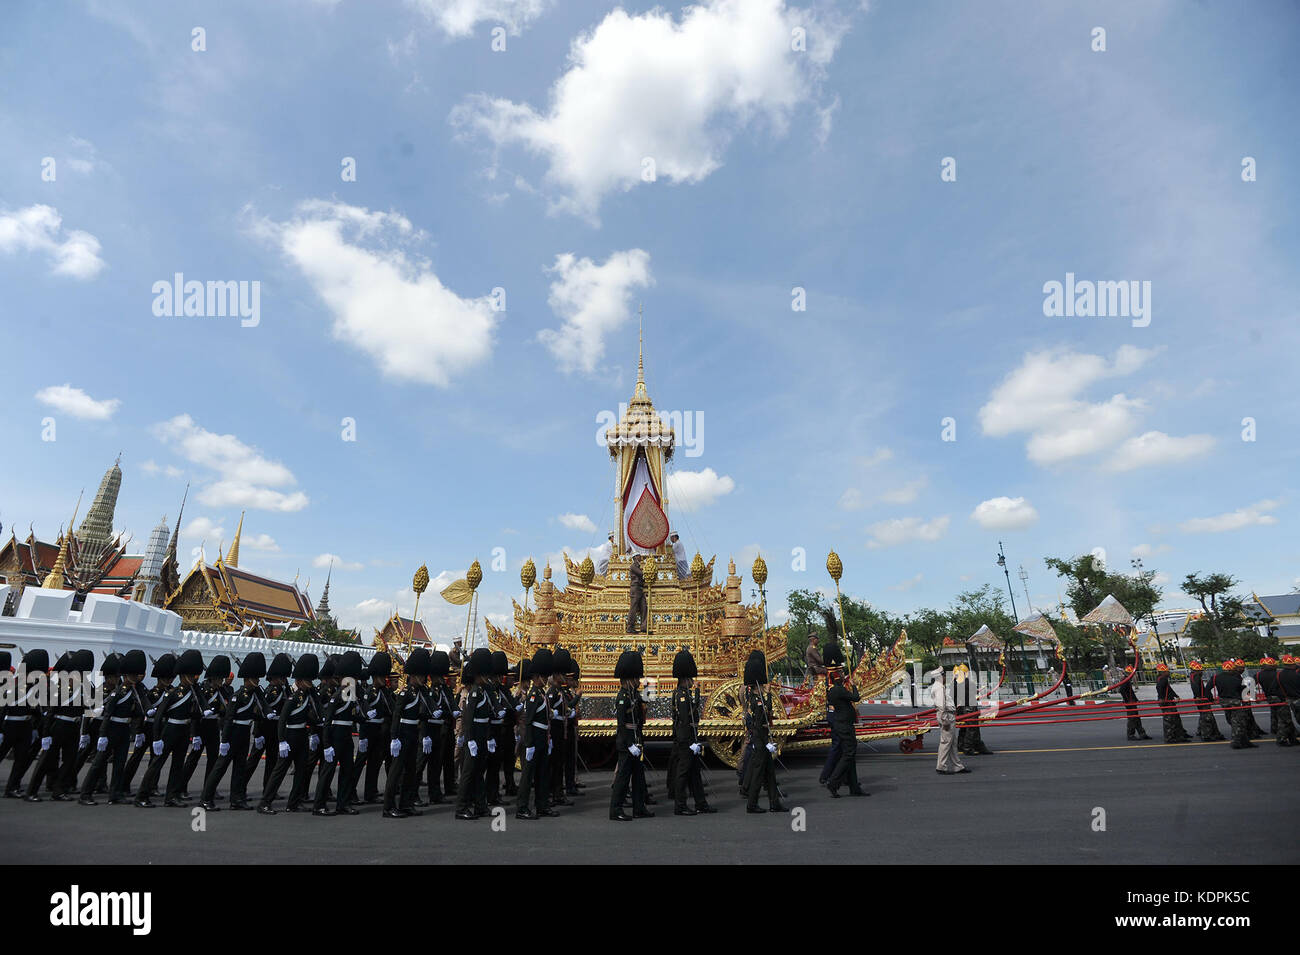 Bangkok, Thailand. 15th Oct, 2017. Honour guard escort the royal chariot during the second rehearsal for the funeral of the late Thai King Bhumibol Adulyadej near the Grand Palace in Bangkok, Thailand, Oct. 15, 2017. The royal funeral for King Bhumibol Adulyadej is scheduled from Oct. 25 to 29. Credit: Rachen Sageamsak/Xinhua/Alamy Live News Stock Photo